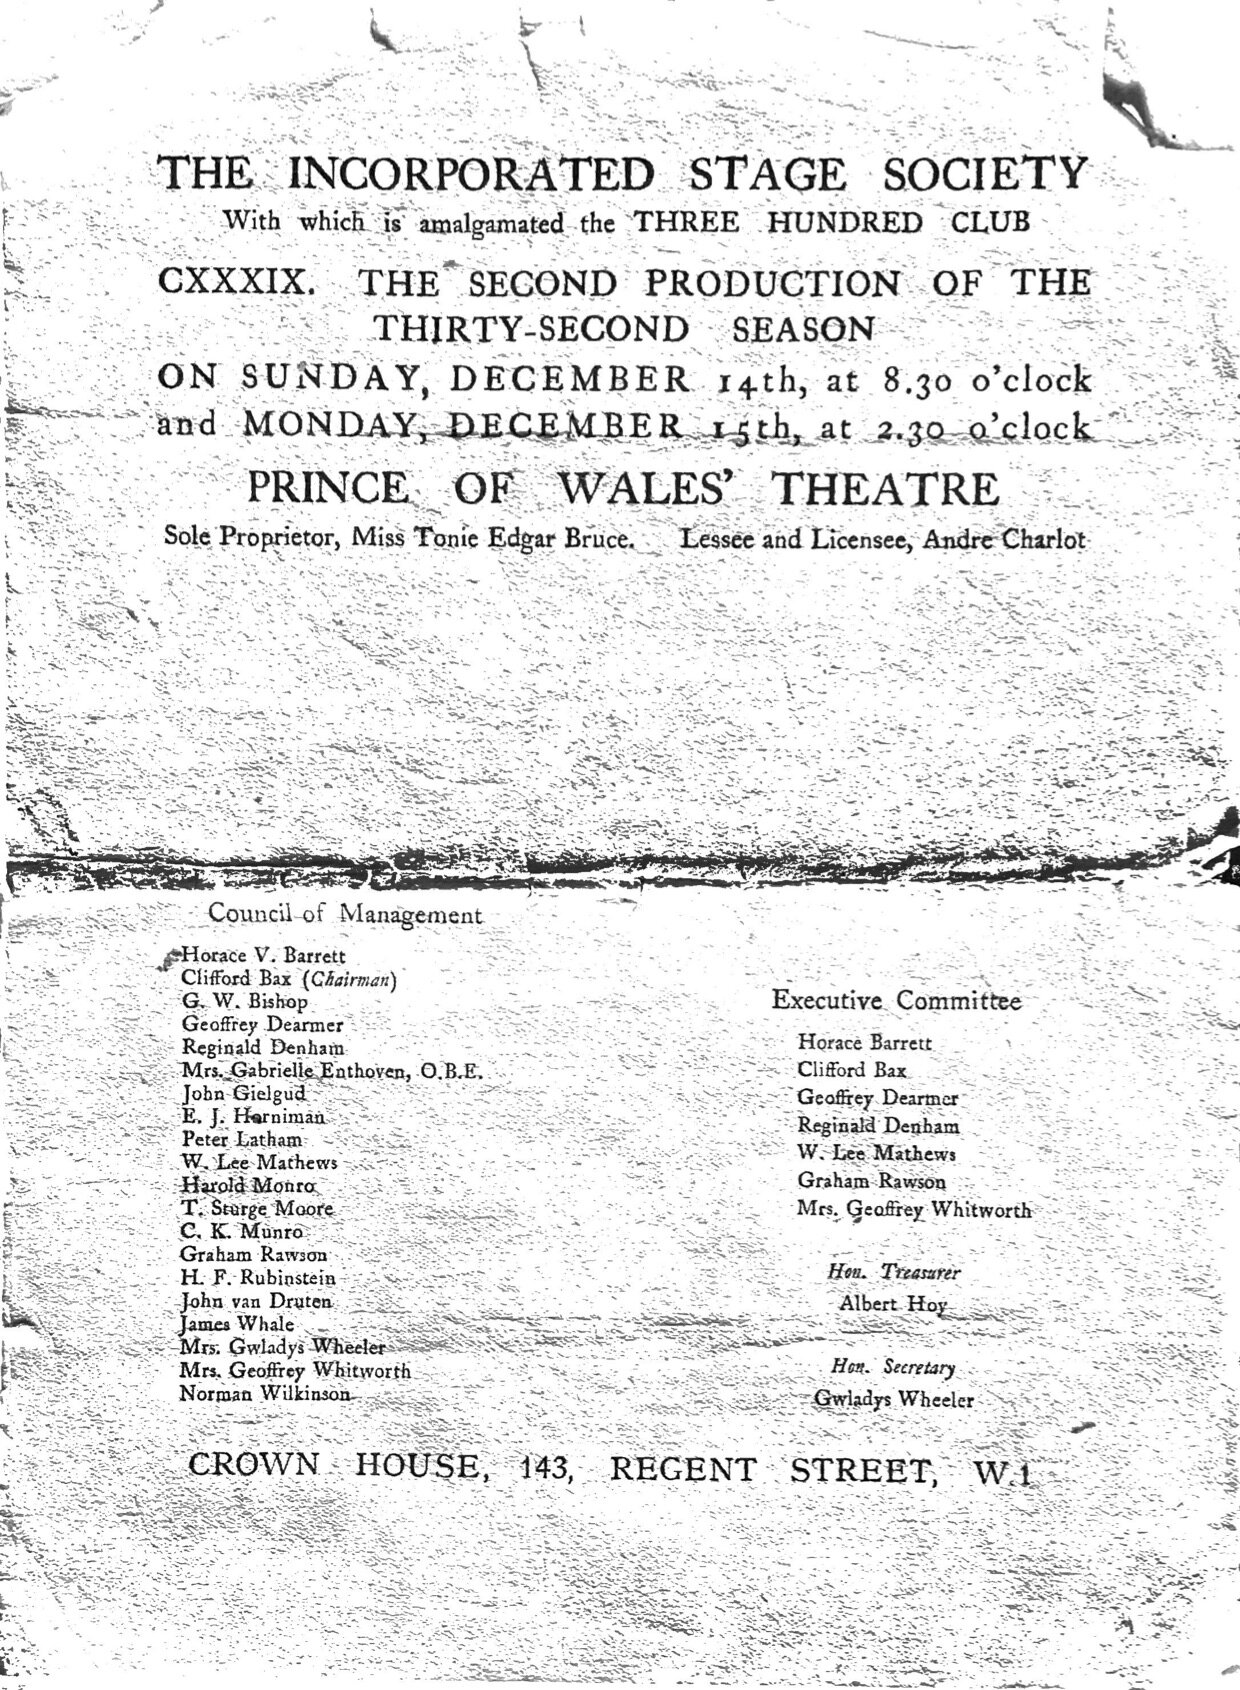 Page 1 of the Playbill for "The Borrowed Life"